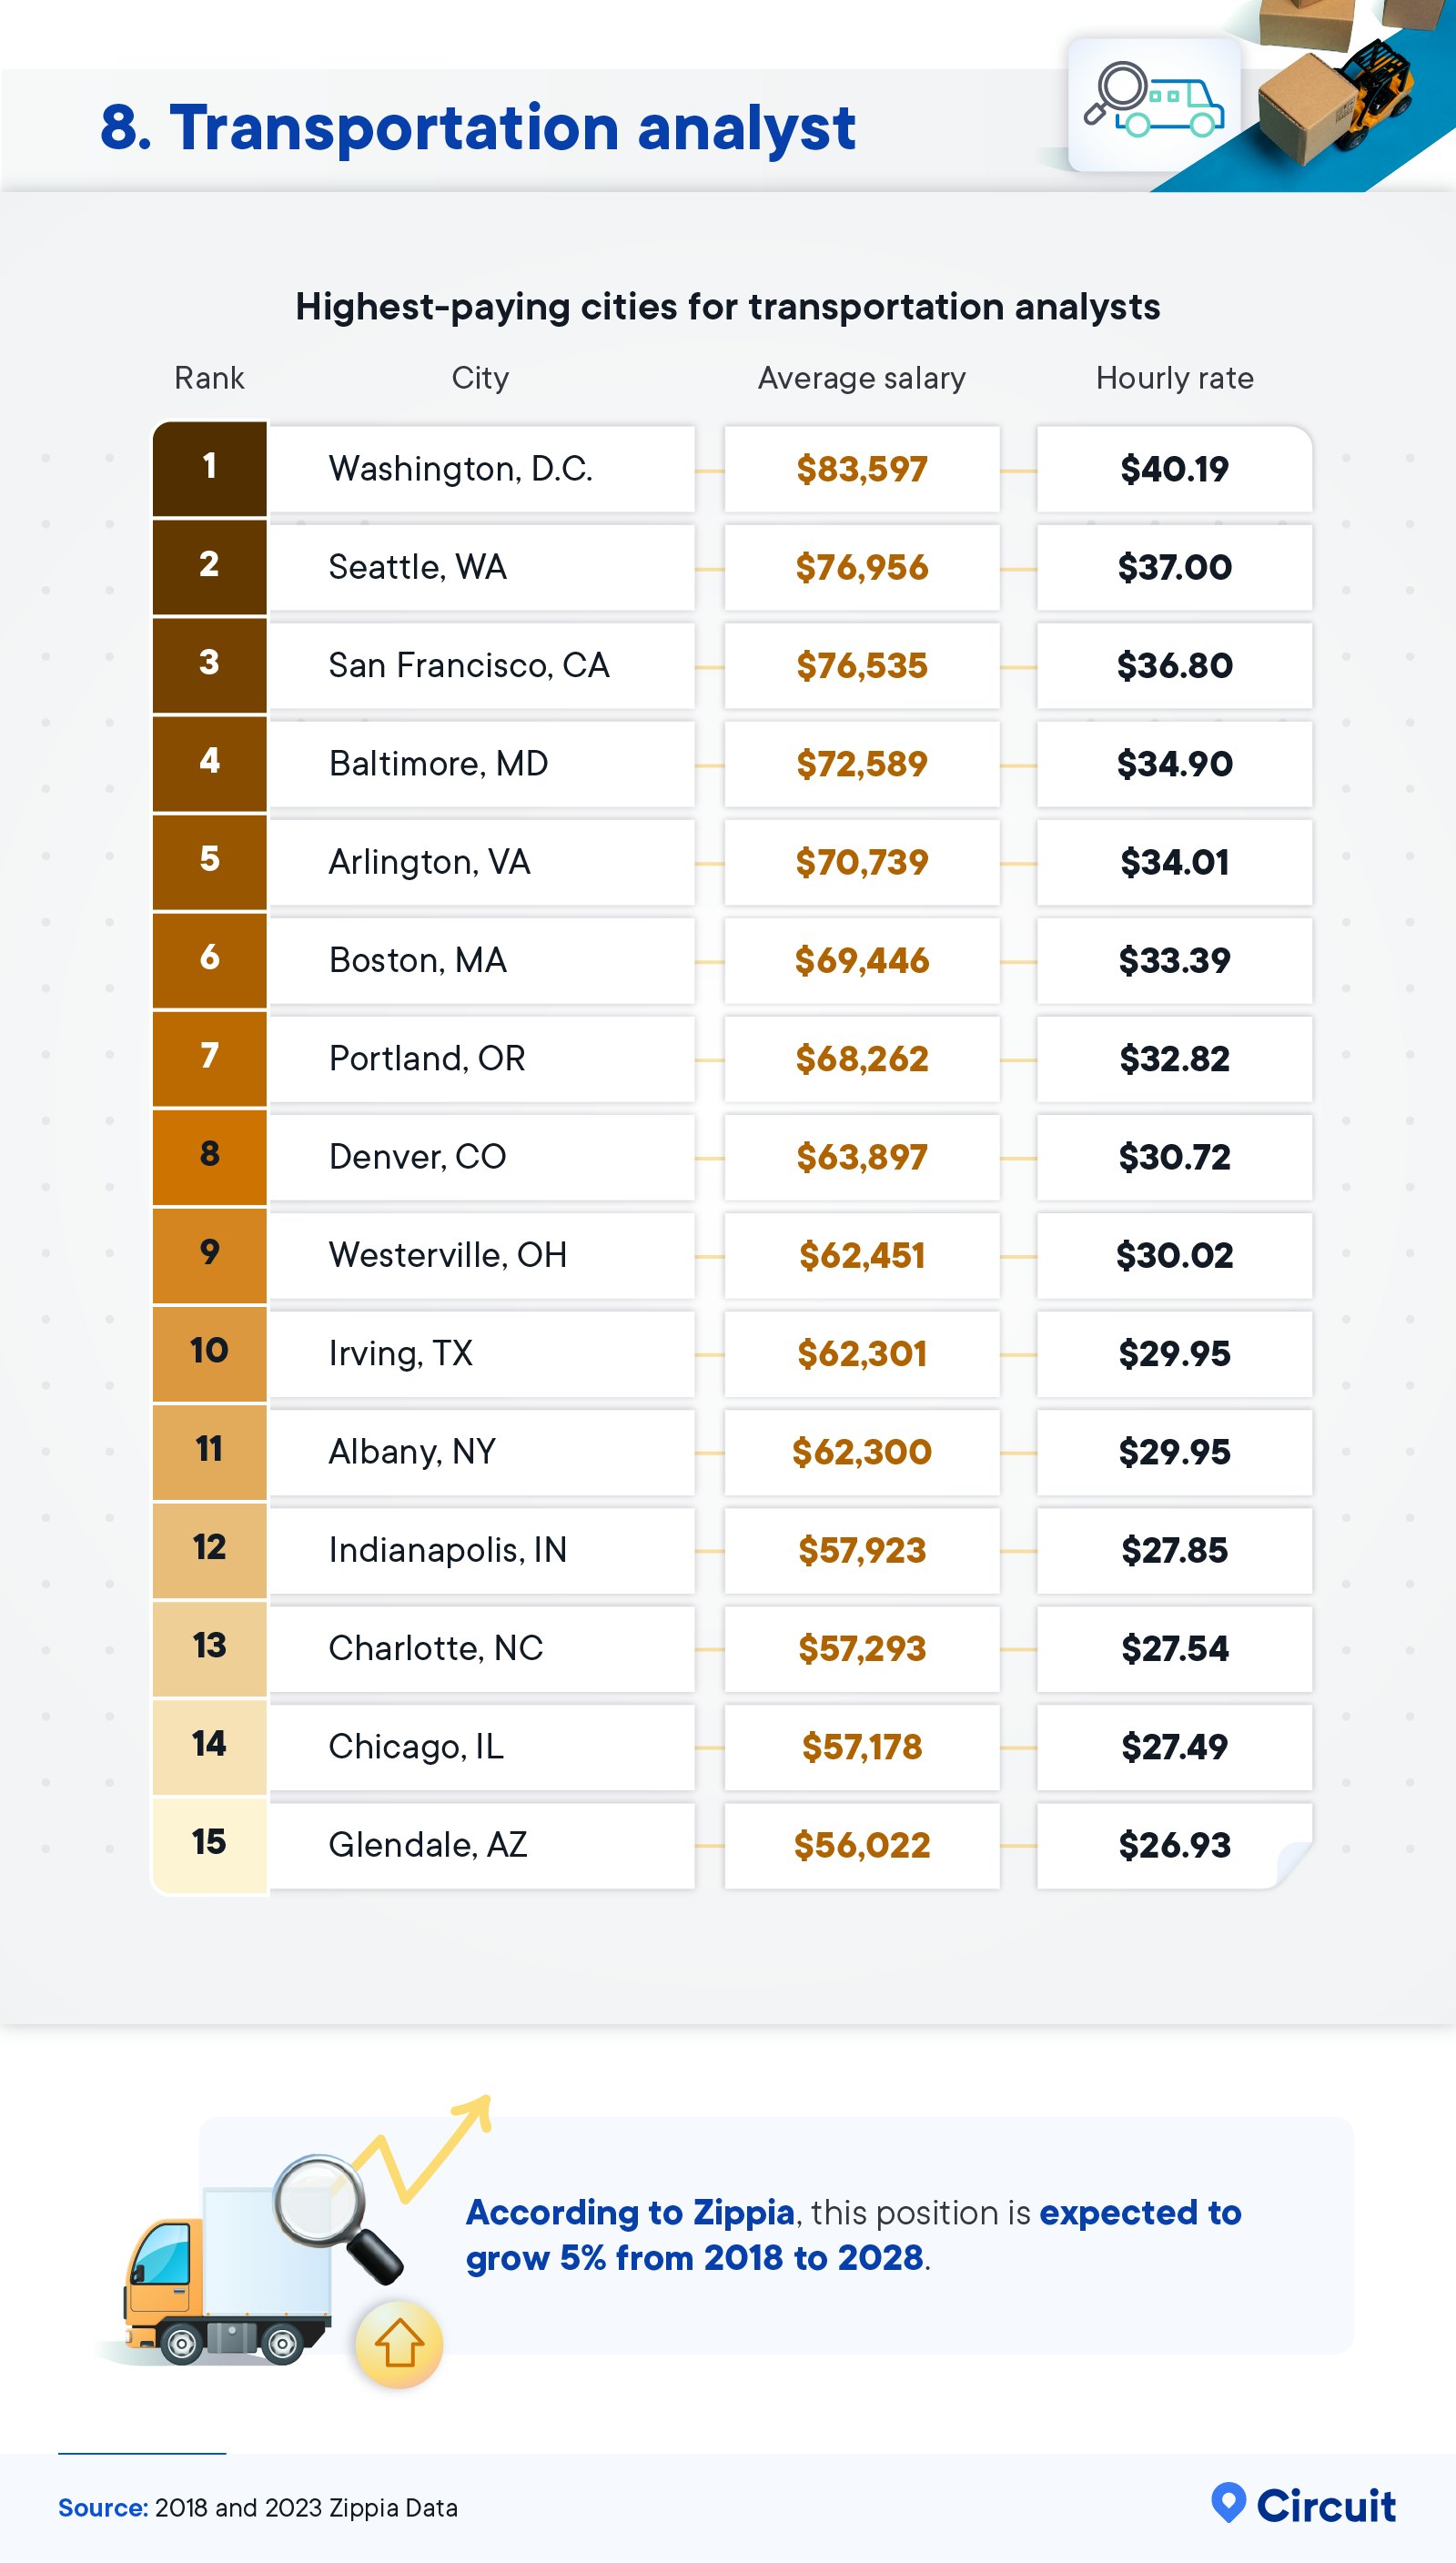 Highest-paying cities for transportation analysts